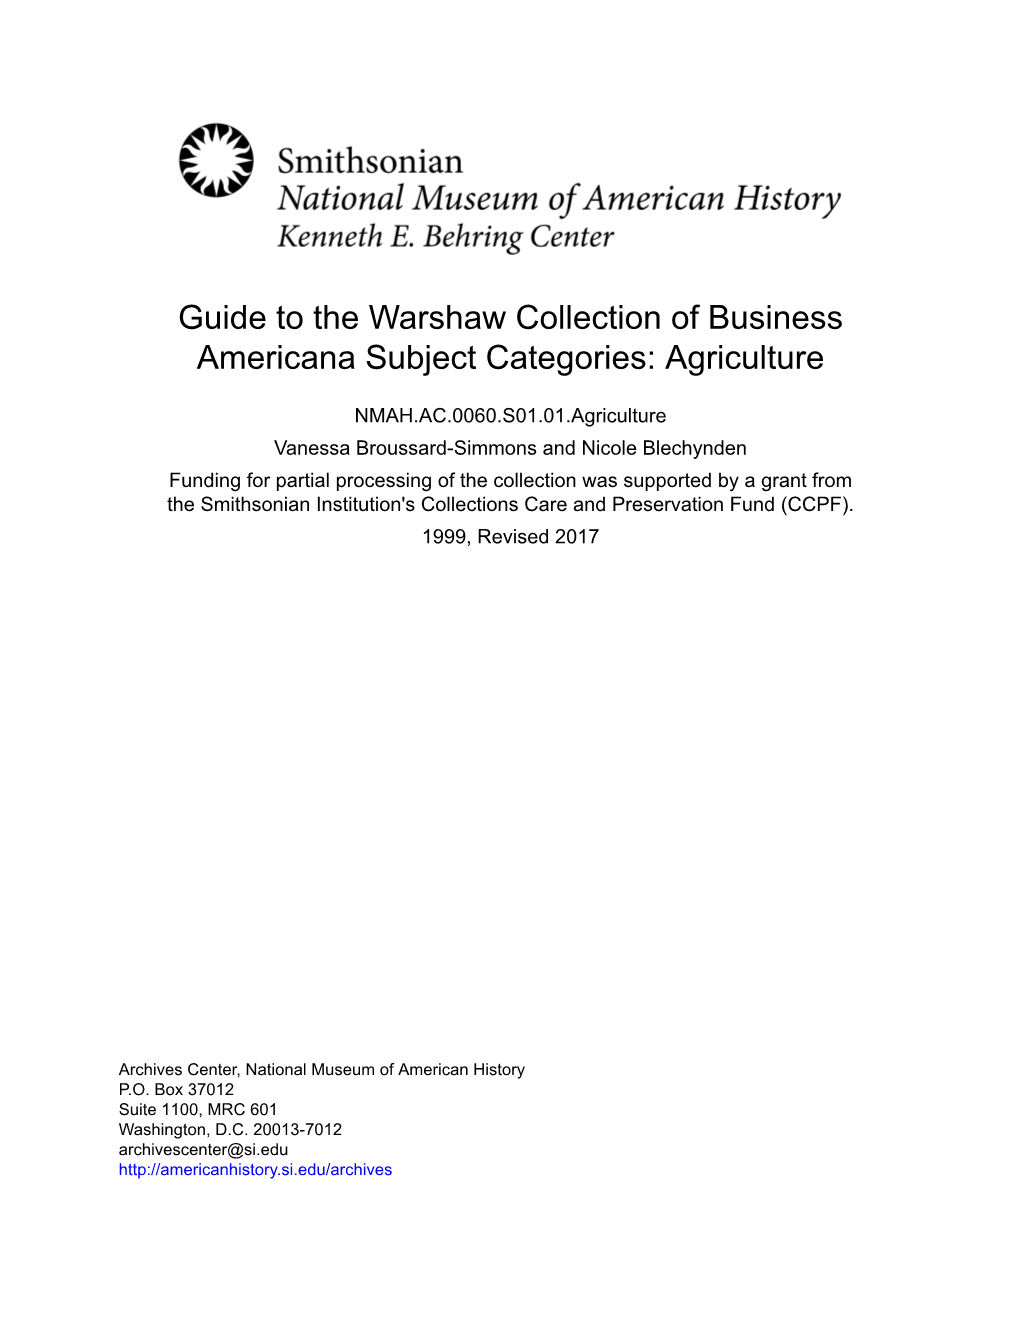 Guide to the Warshaw Collection of Business Americana Subject Categories: Agriculture